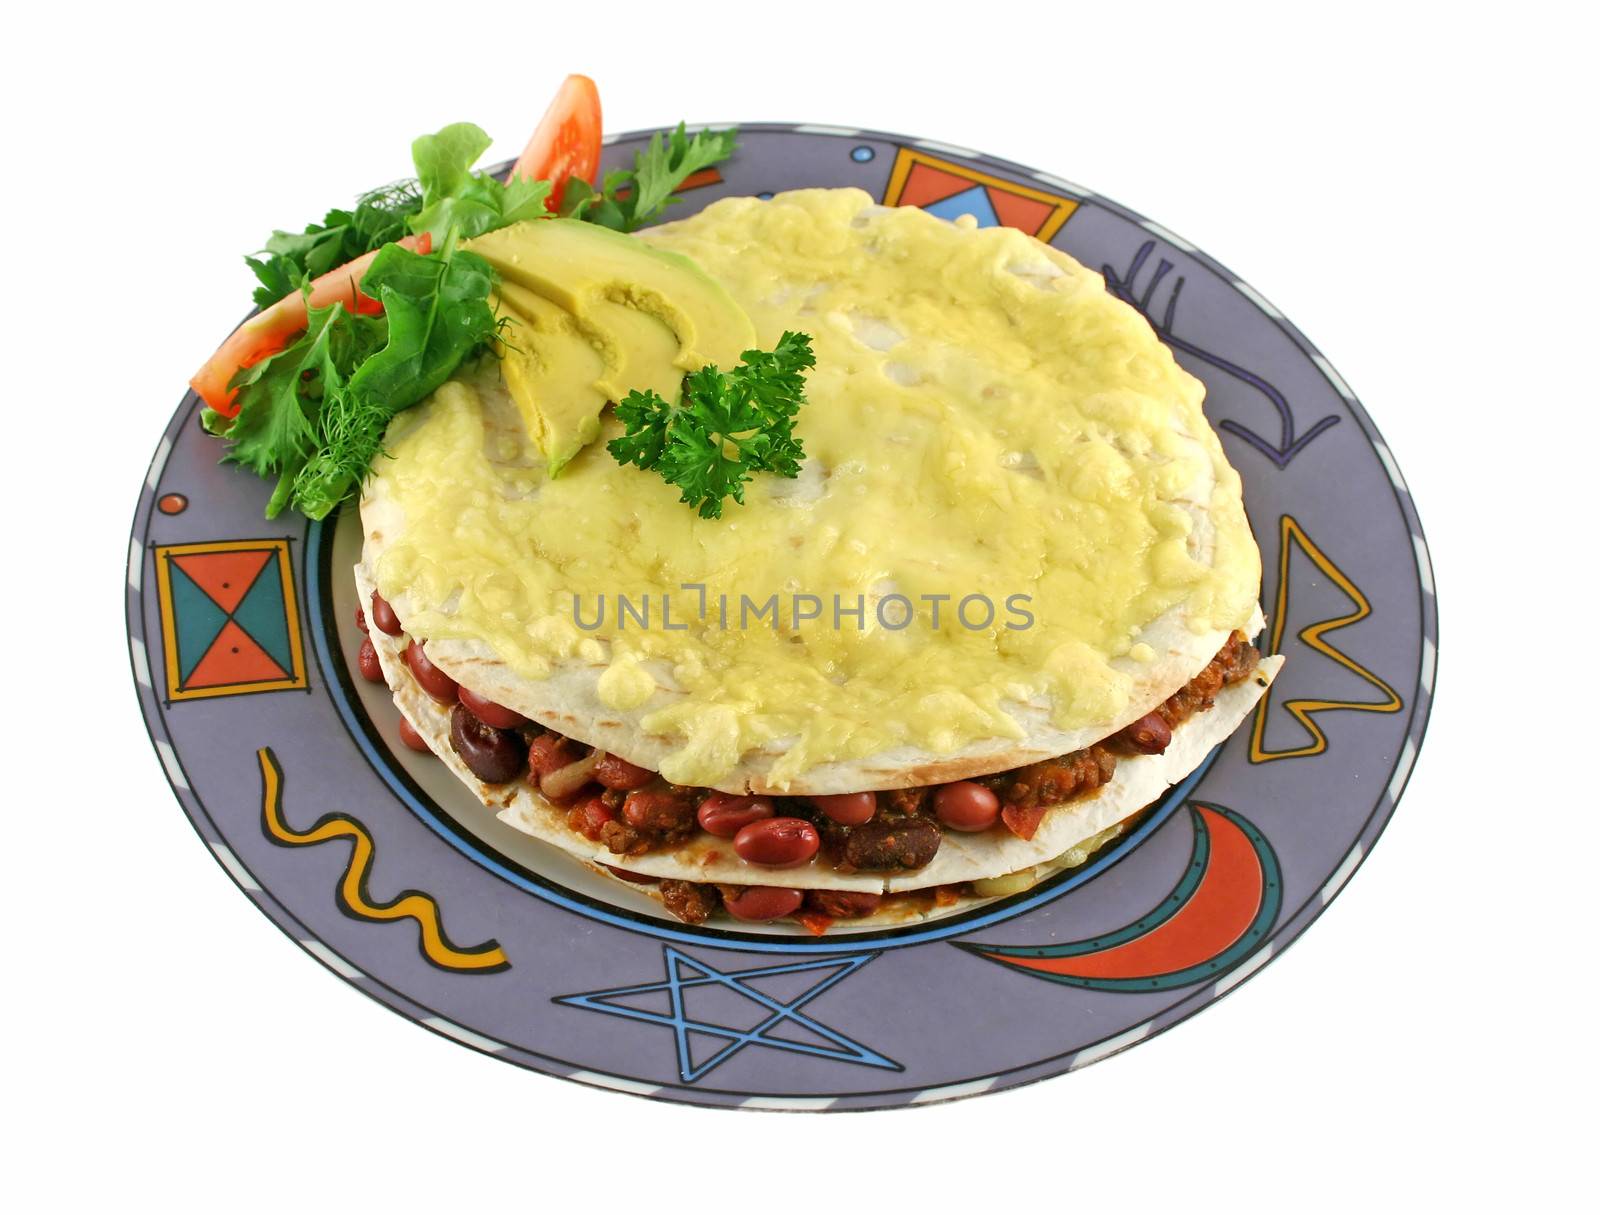 A beef and bean Mexican tortilla stack with cheese and salad.